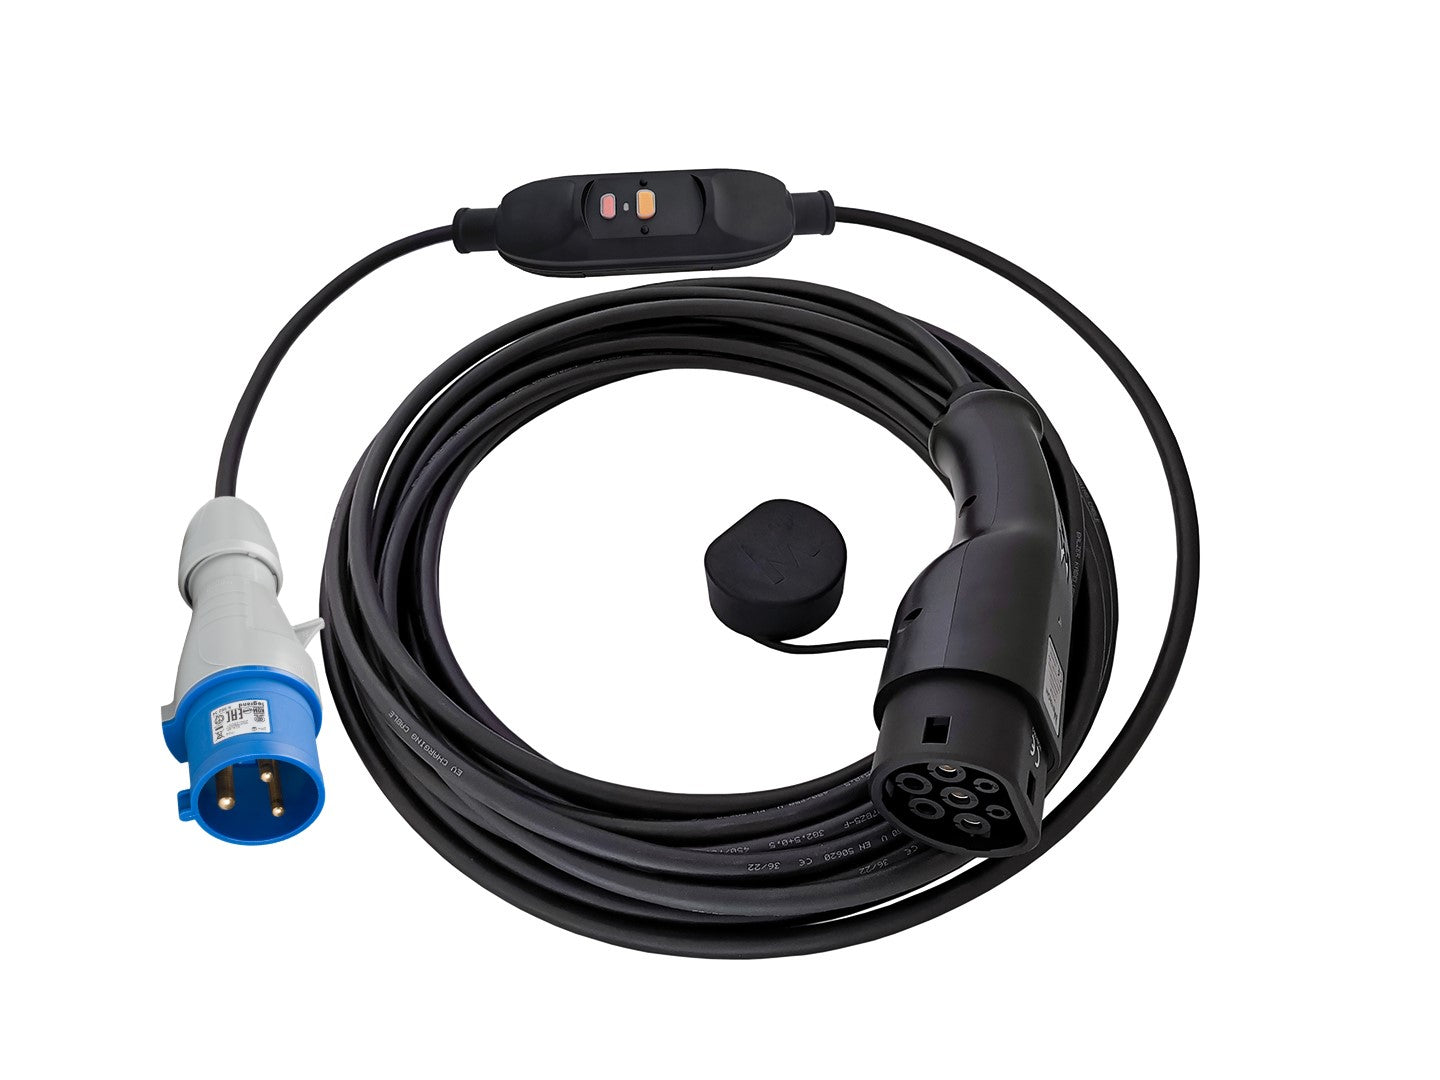 Mercedes A250e - Charging cable, 3 pin chargers and CEE charging cables for  the Mercedes A250e